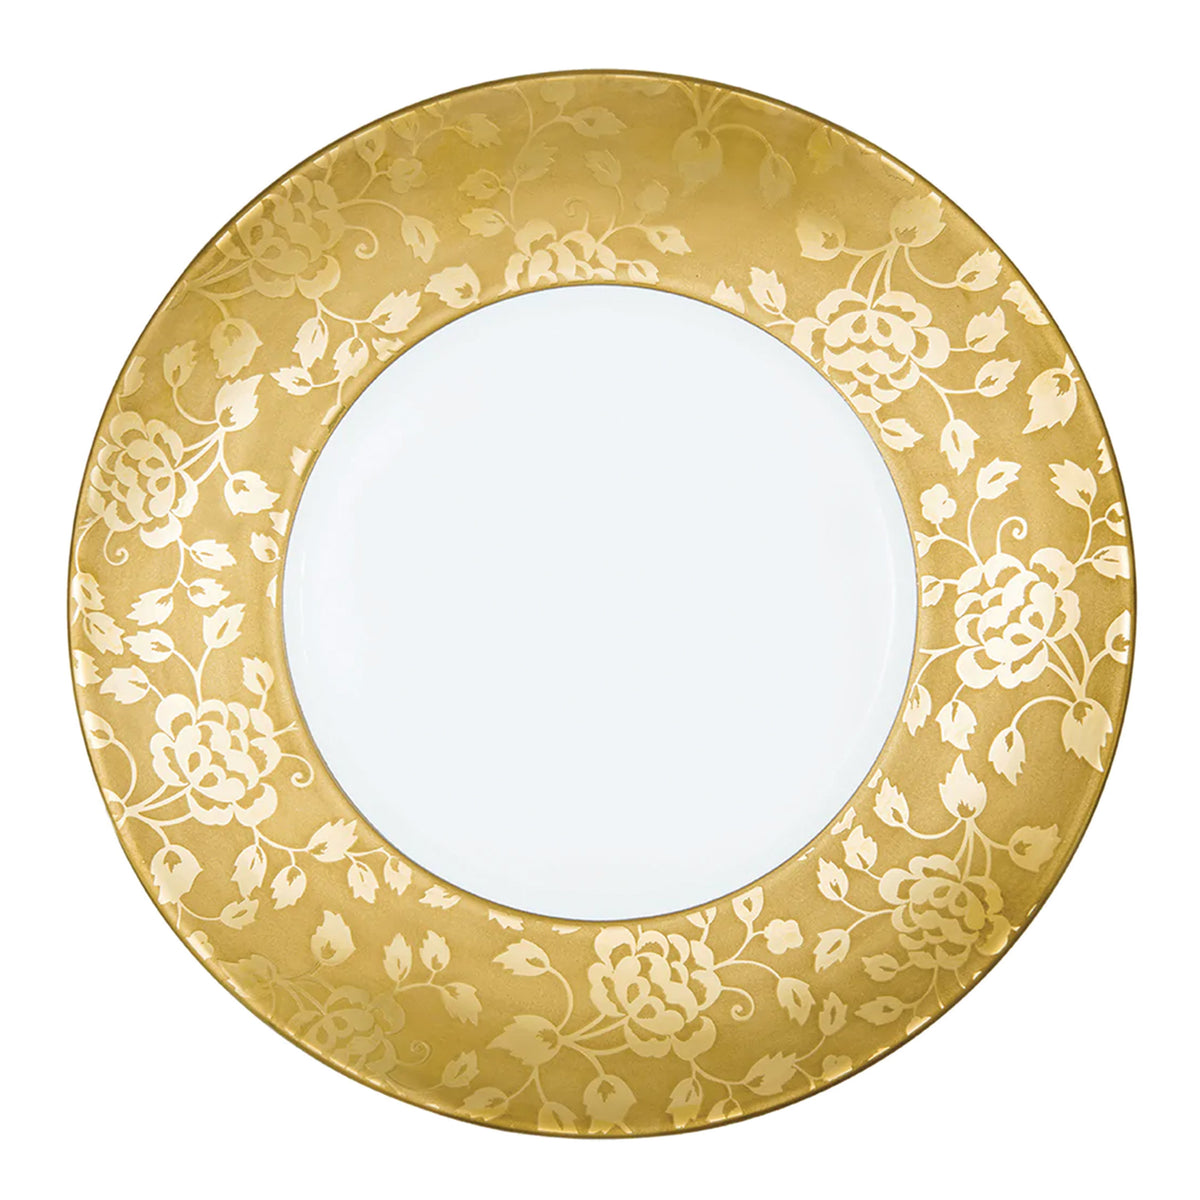 Gold inlaid thistles - Charger plate